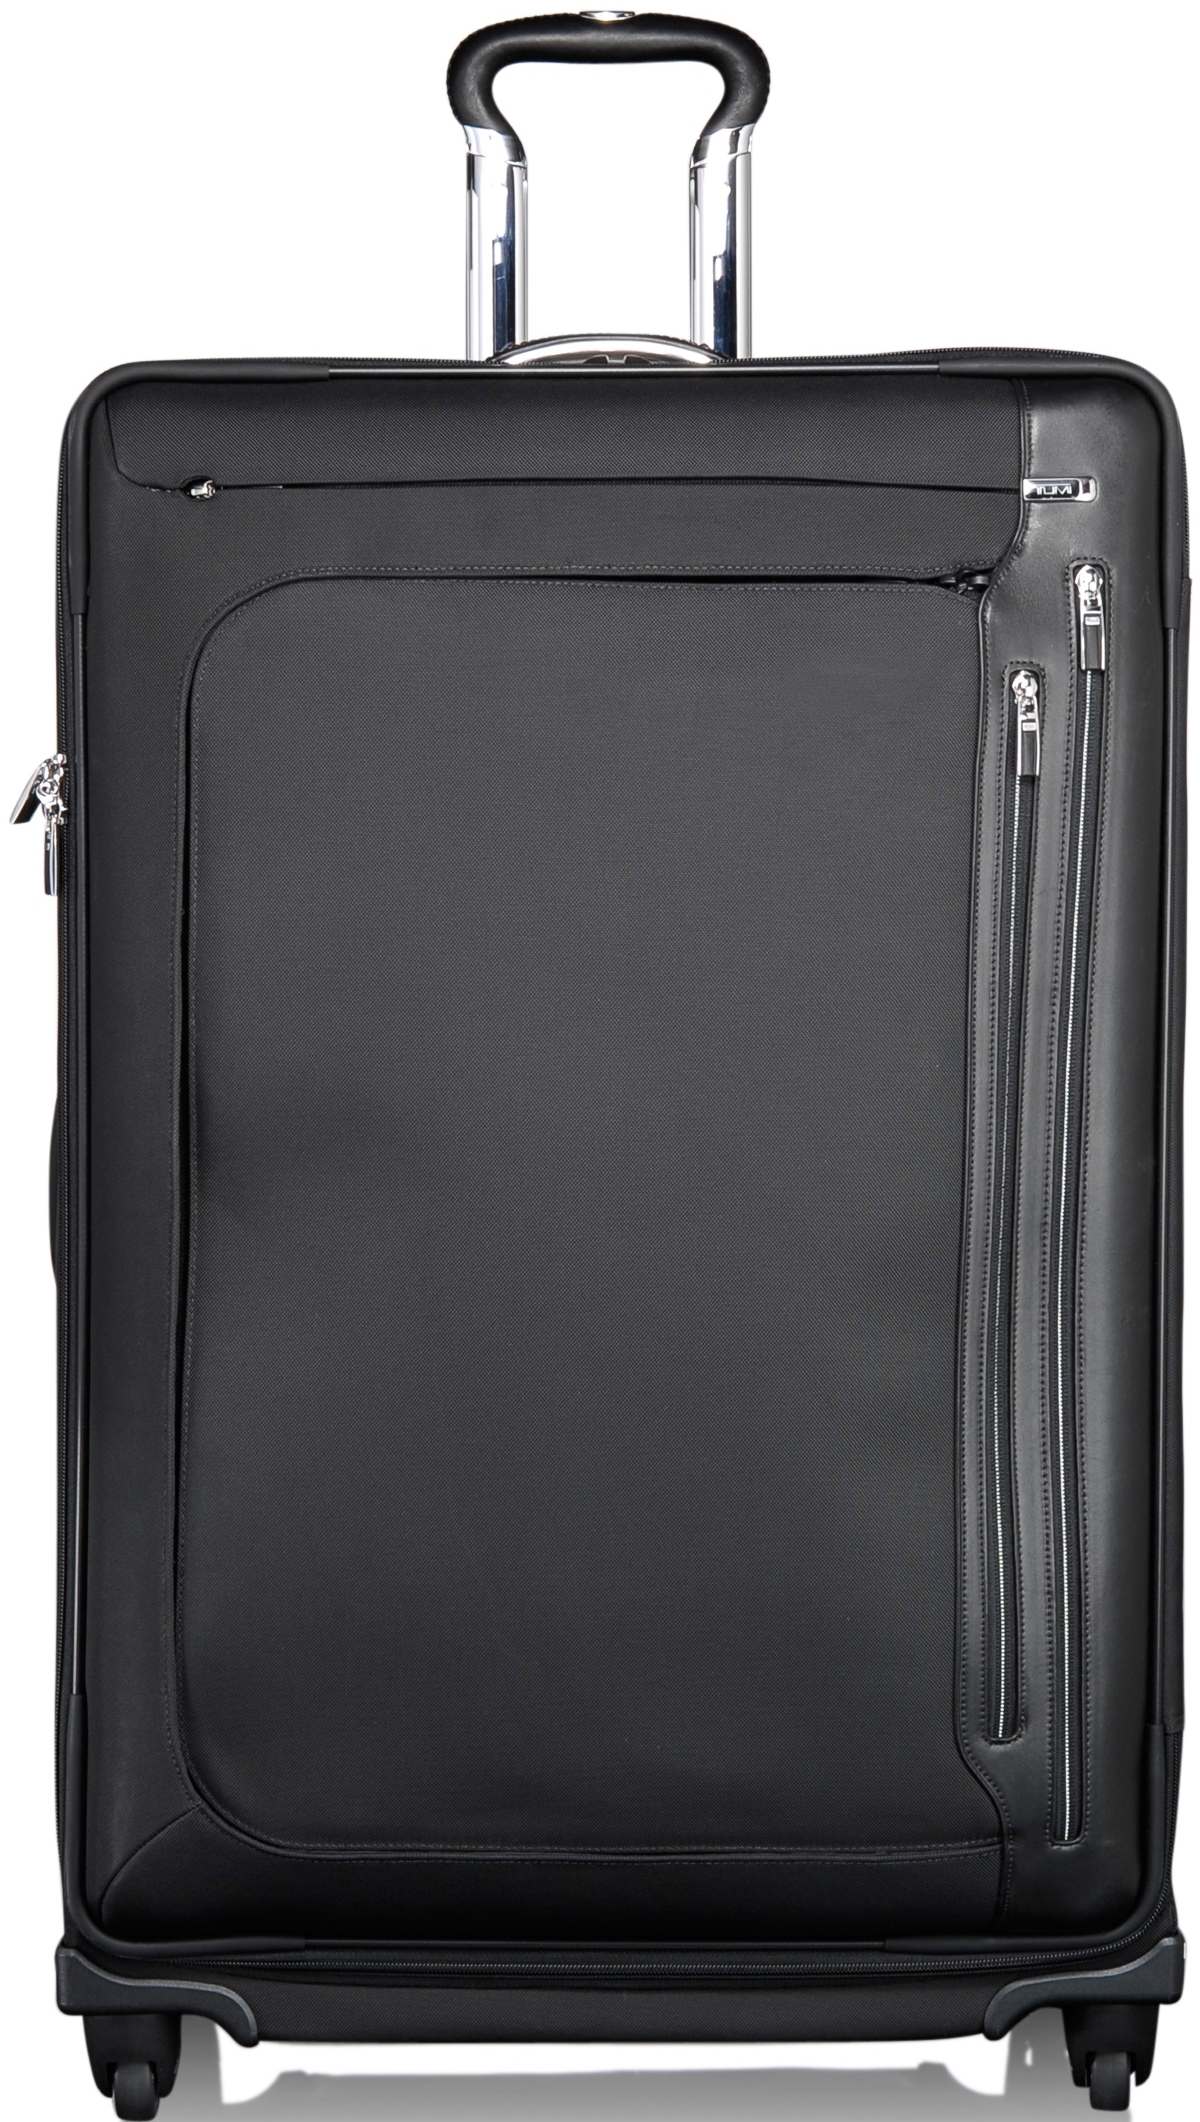 Tumi Zurich 4-Wheeled Expandable Fortnight Trip Packing Case, $1,495